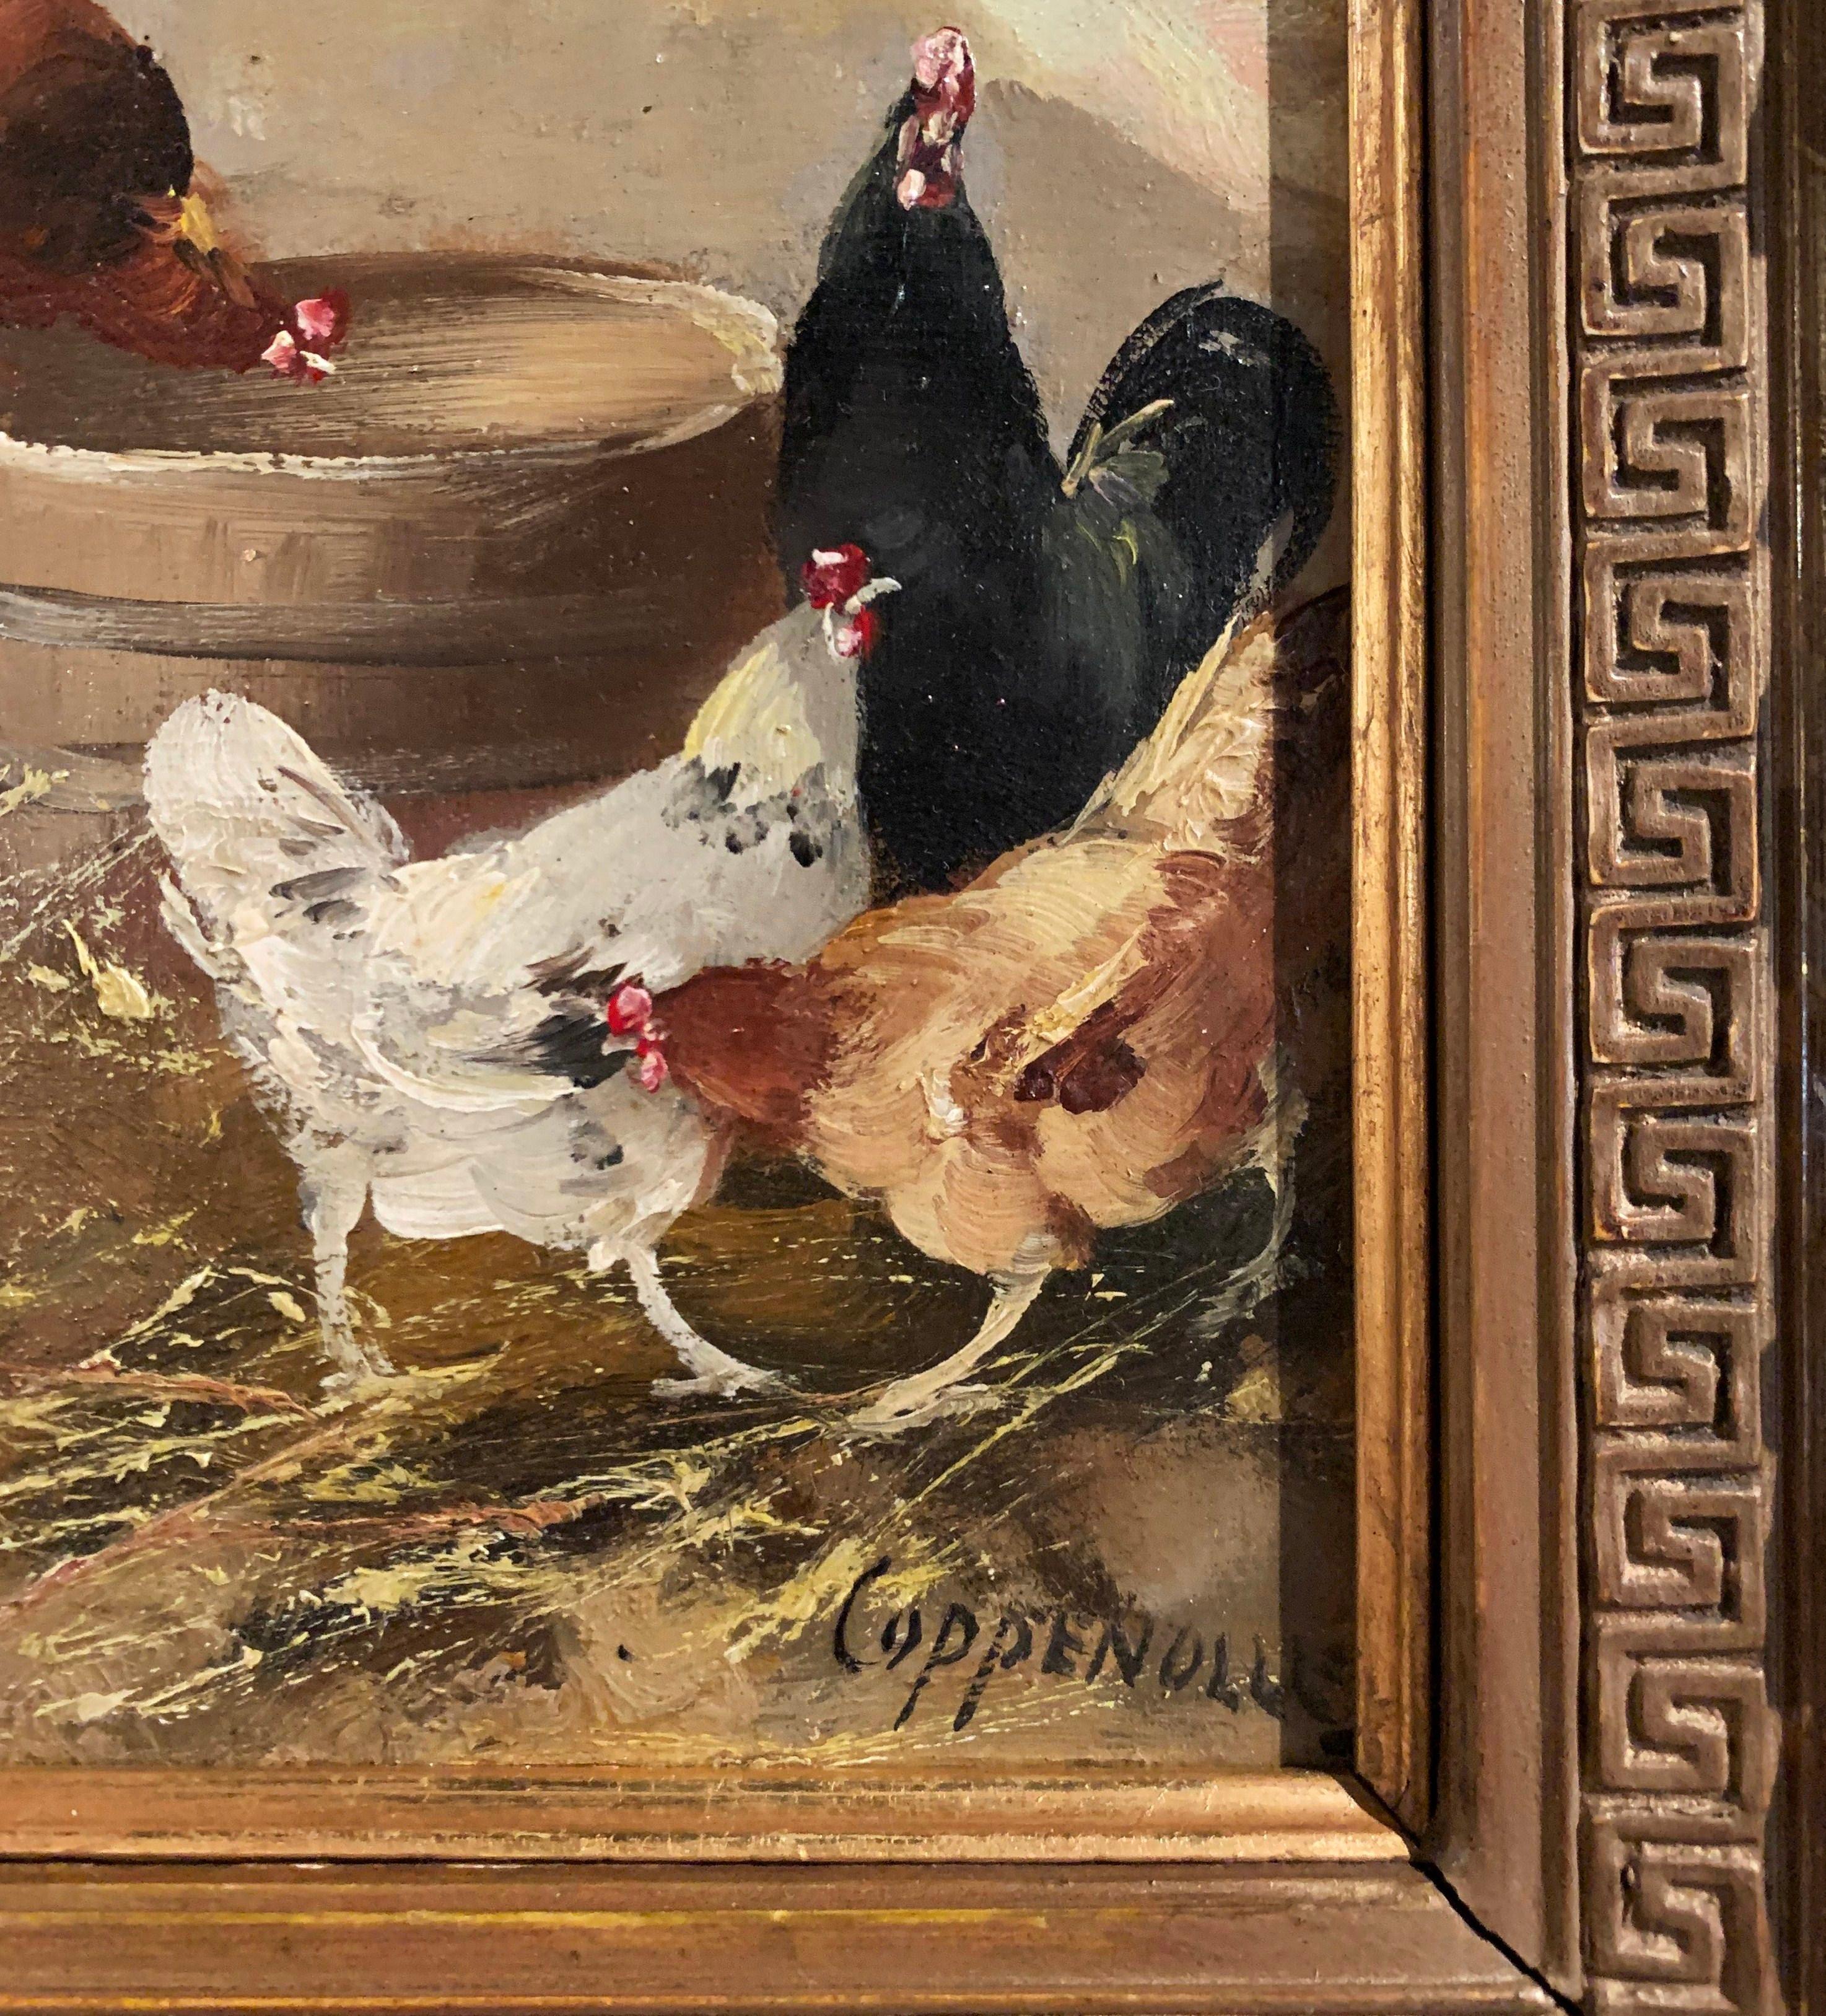 Canvas Pair of 19th Century Chicken Paintings in Gilt Frames Signed E. Coppenolle